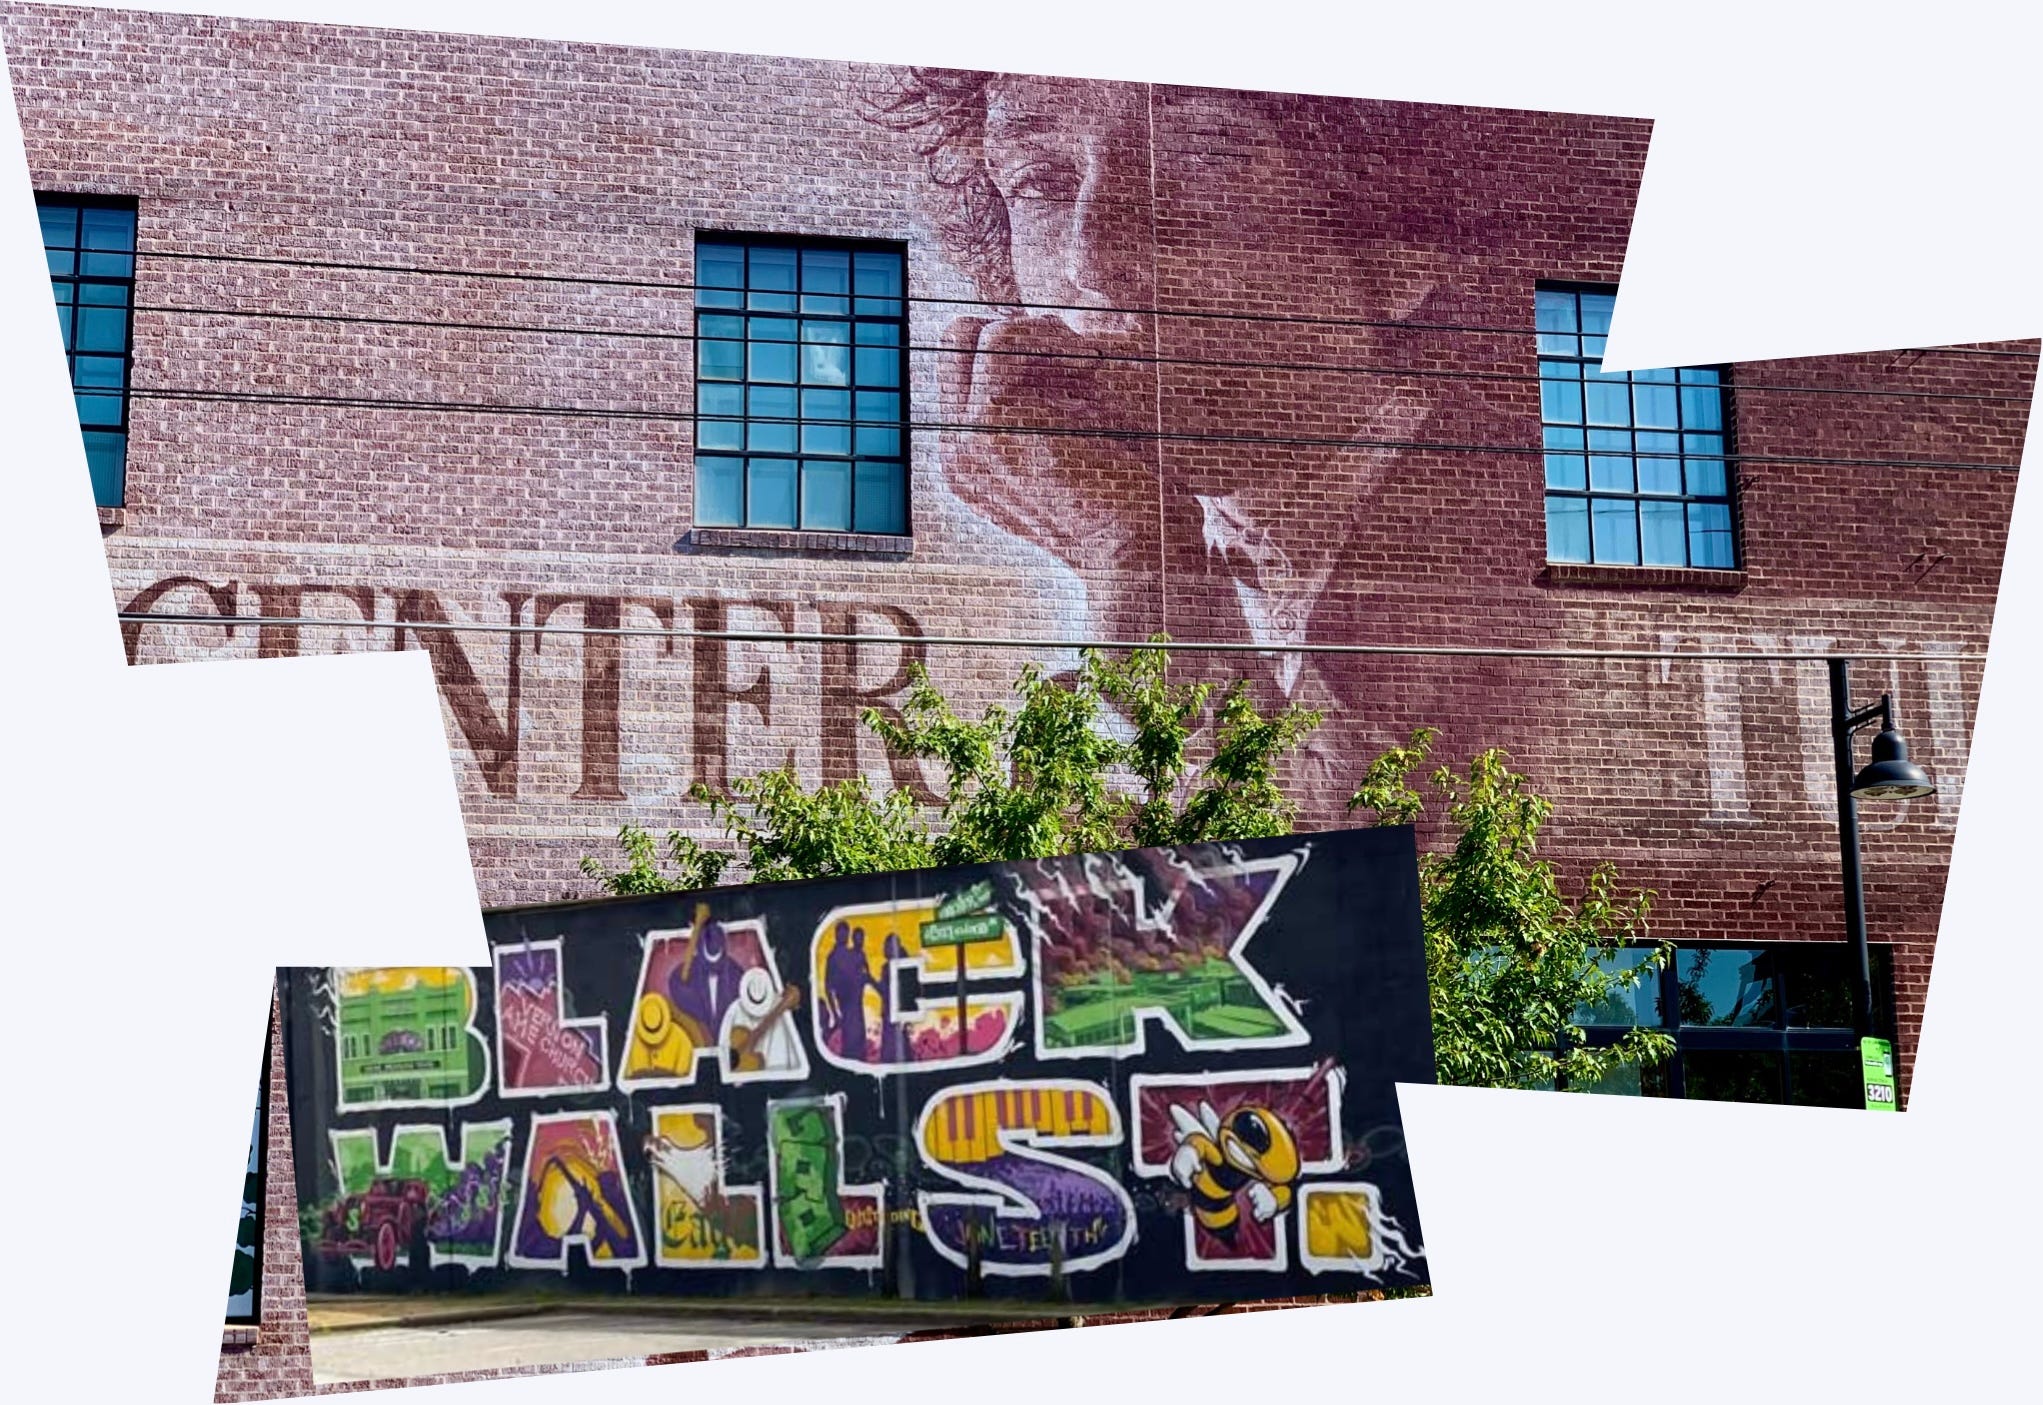 Mural of dylan on bob dylan center with black Wall Street mural superimposed